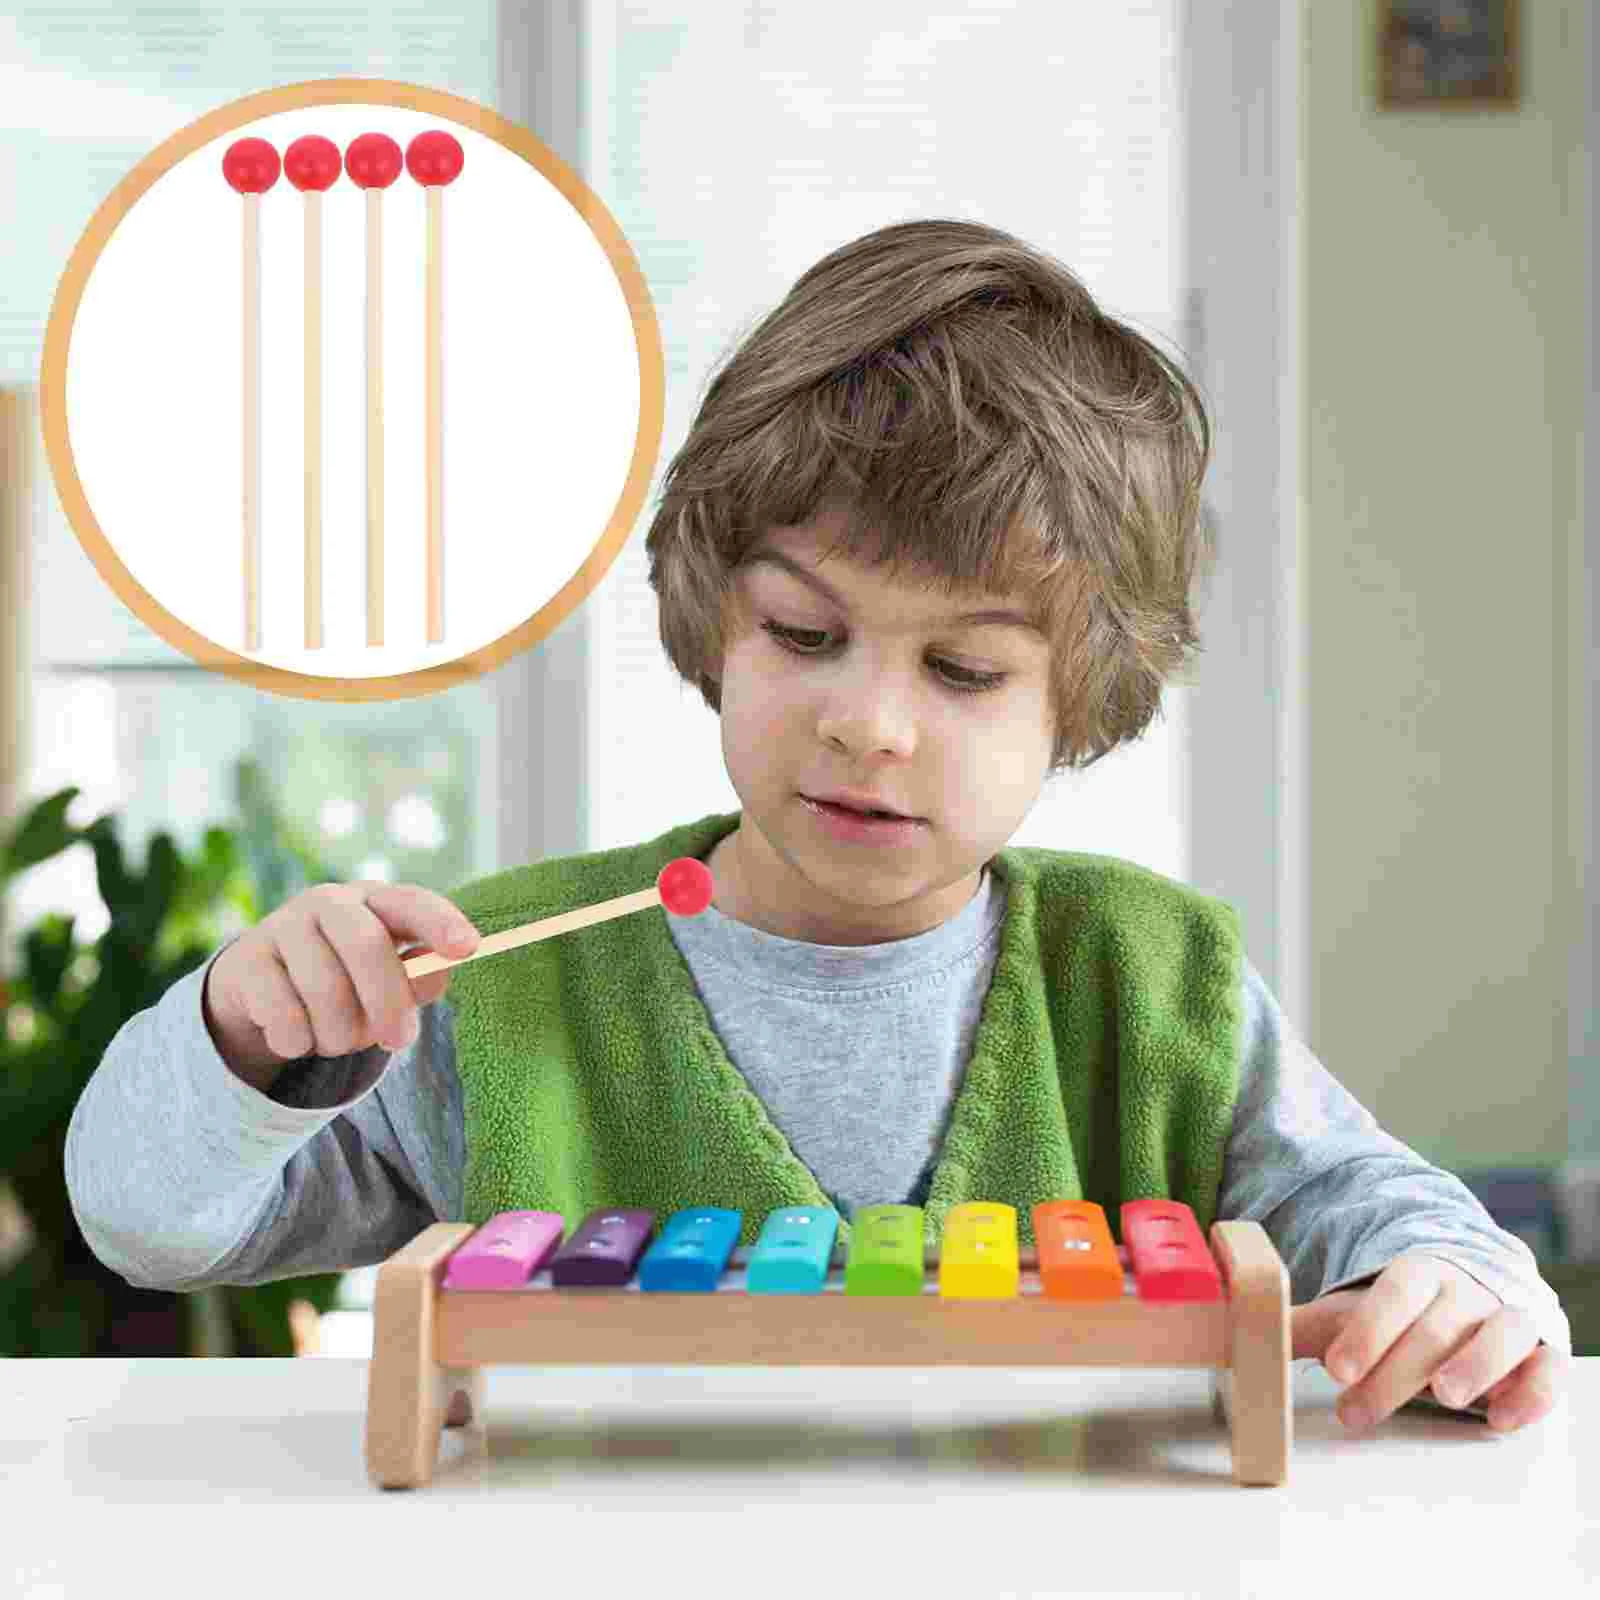 

Musical Toy Drumsticks Percussion Mallets Sticks Multi Purpose Xylophone Chime Bell Stick Wood Handle Musical